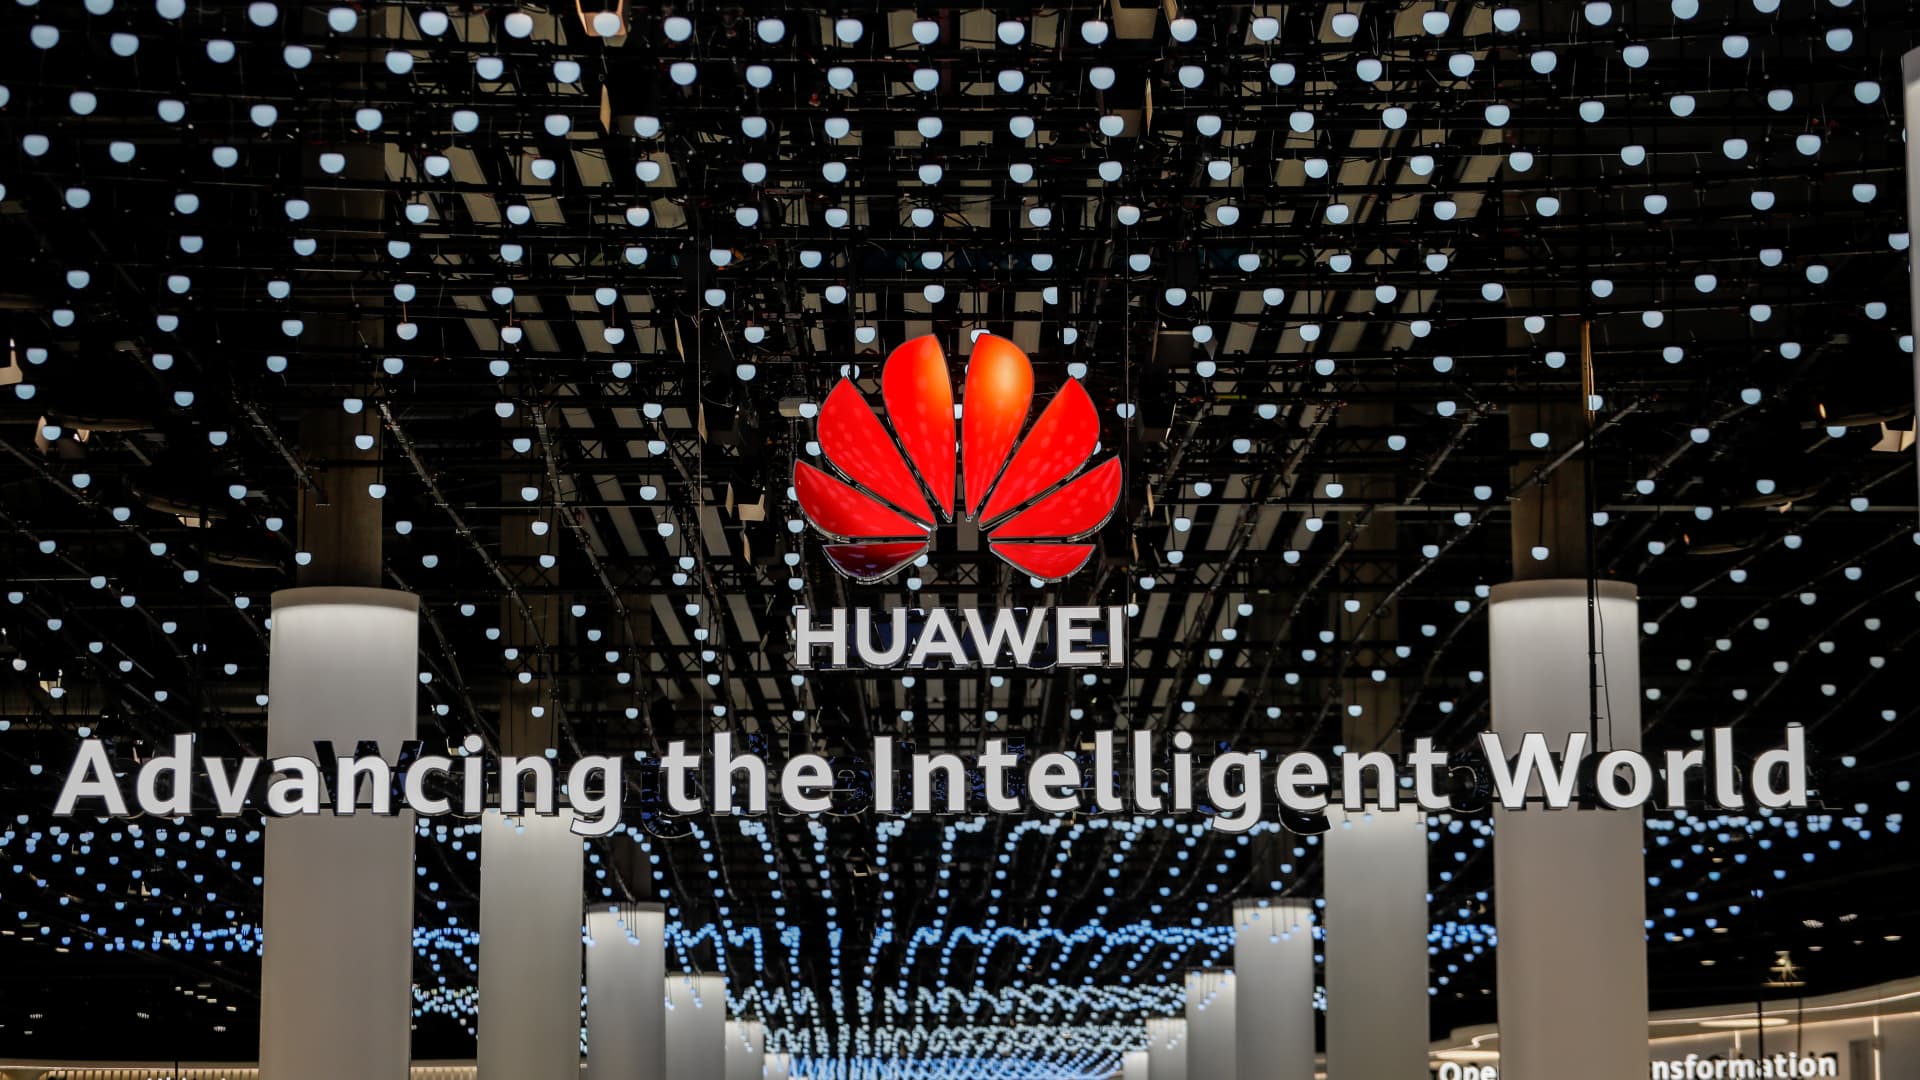 Huawei Rebounds: Strong Net Profit, Surges in Smartphone Sales and Market Share Despite US Sanctions